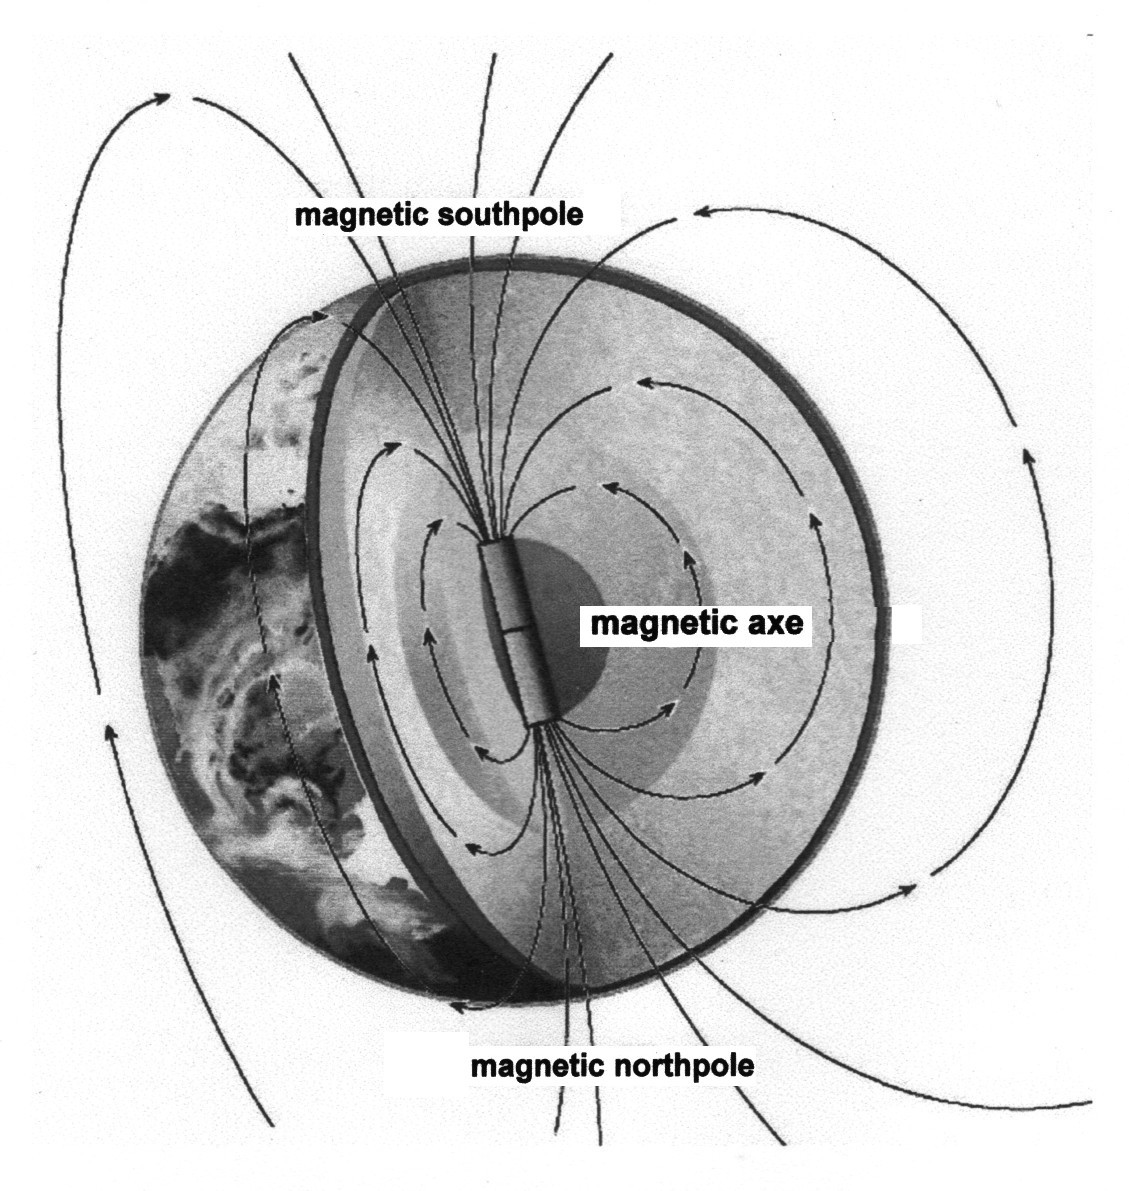 magnetic field of the earth